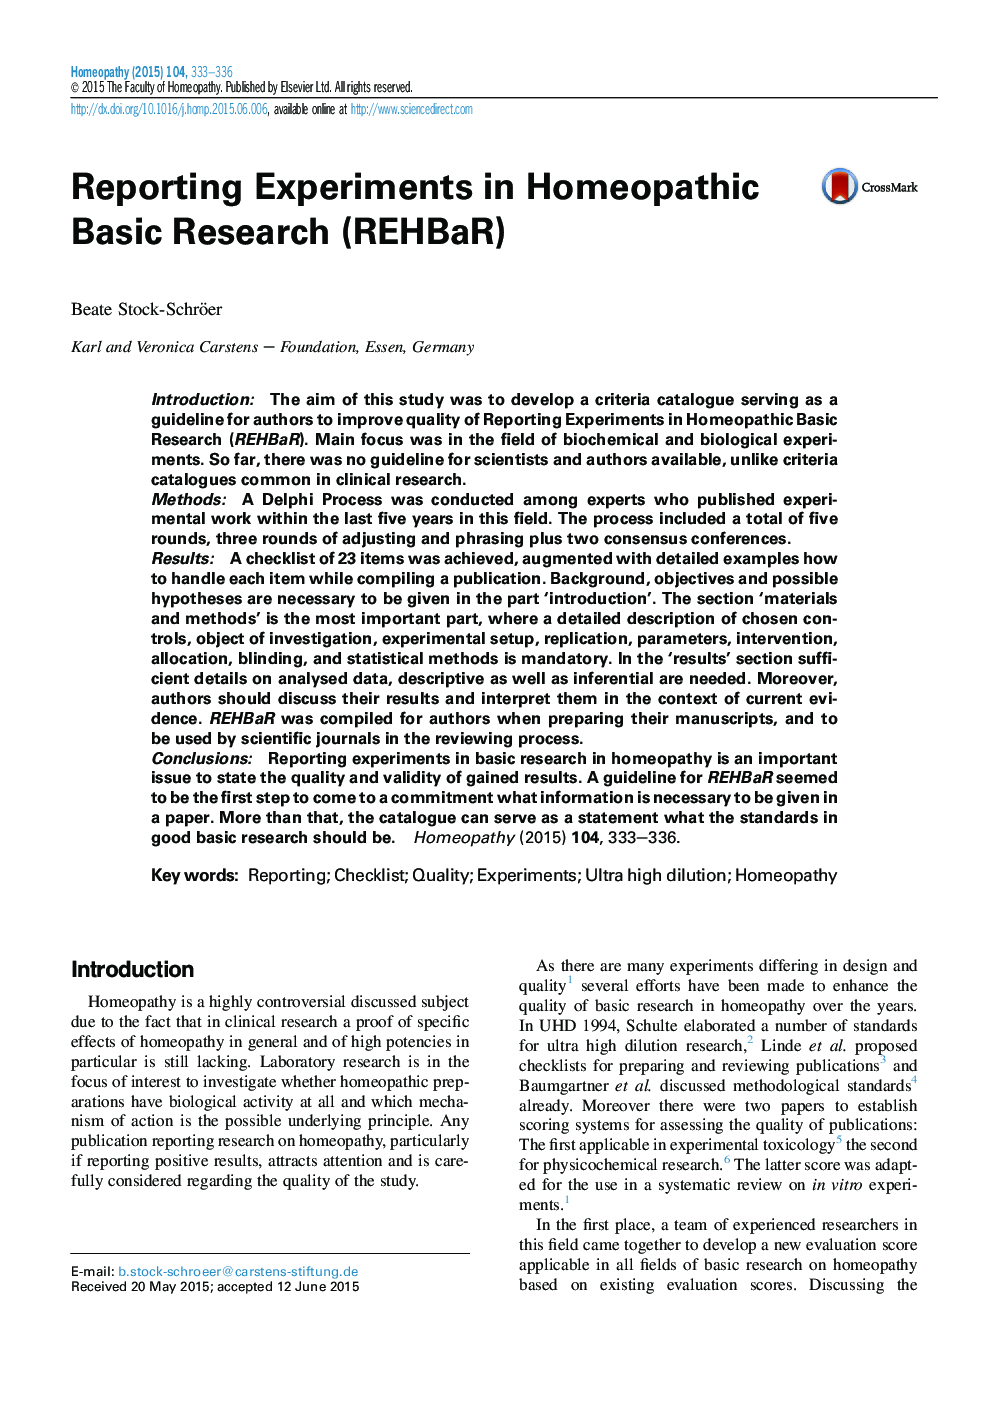 Reporting Experiments in Homeopathic Basic Research (REHBaR)